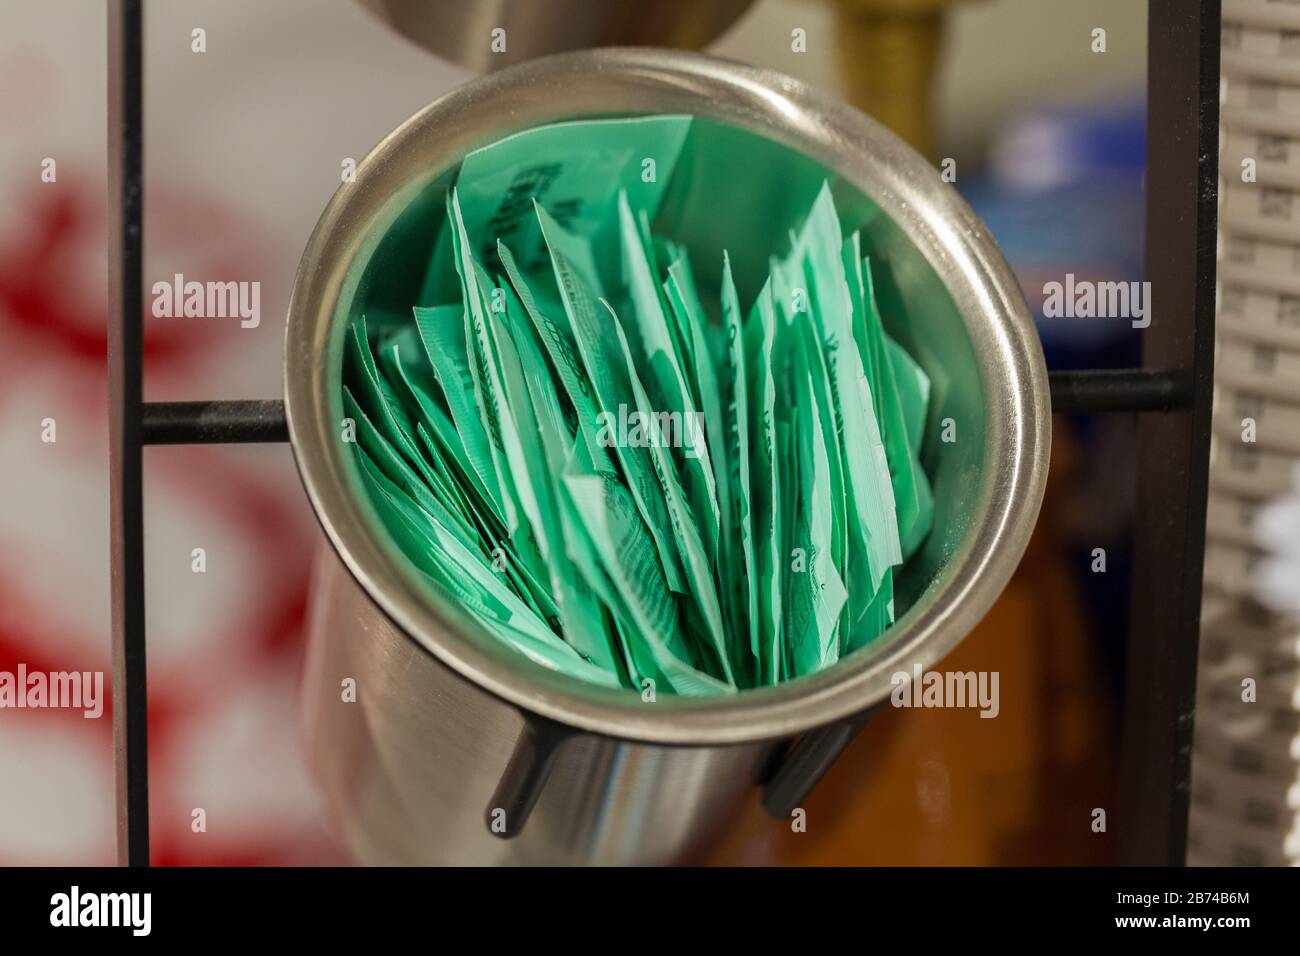 Sugar sachets in a metallic bowl. Many small, green paper bagsfilled with sugar. Neutral background, no logos. In a café. Stock Photo